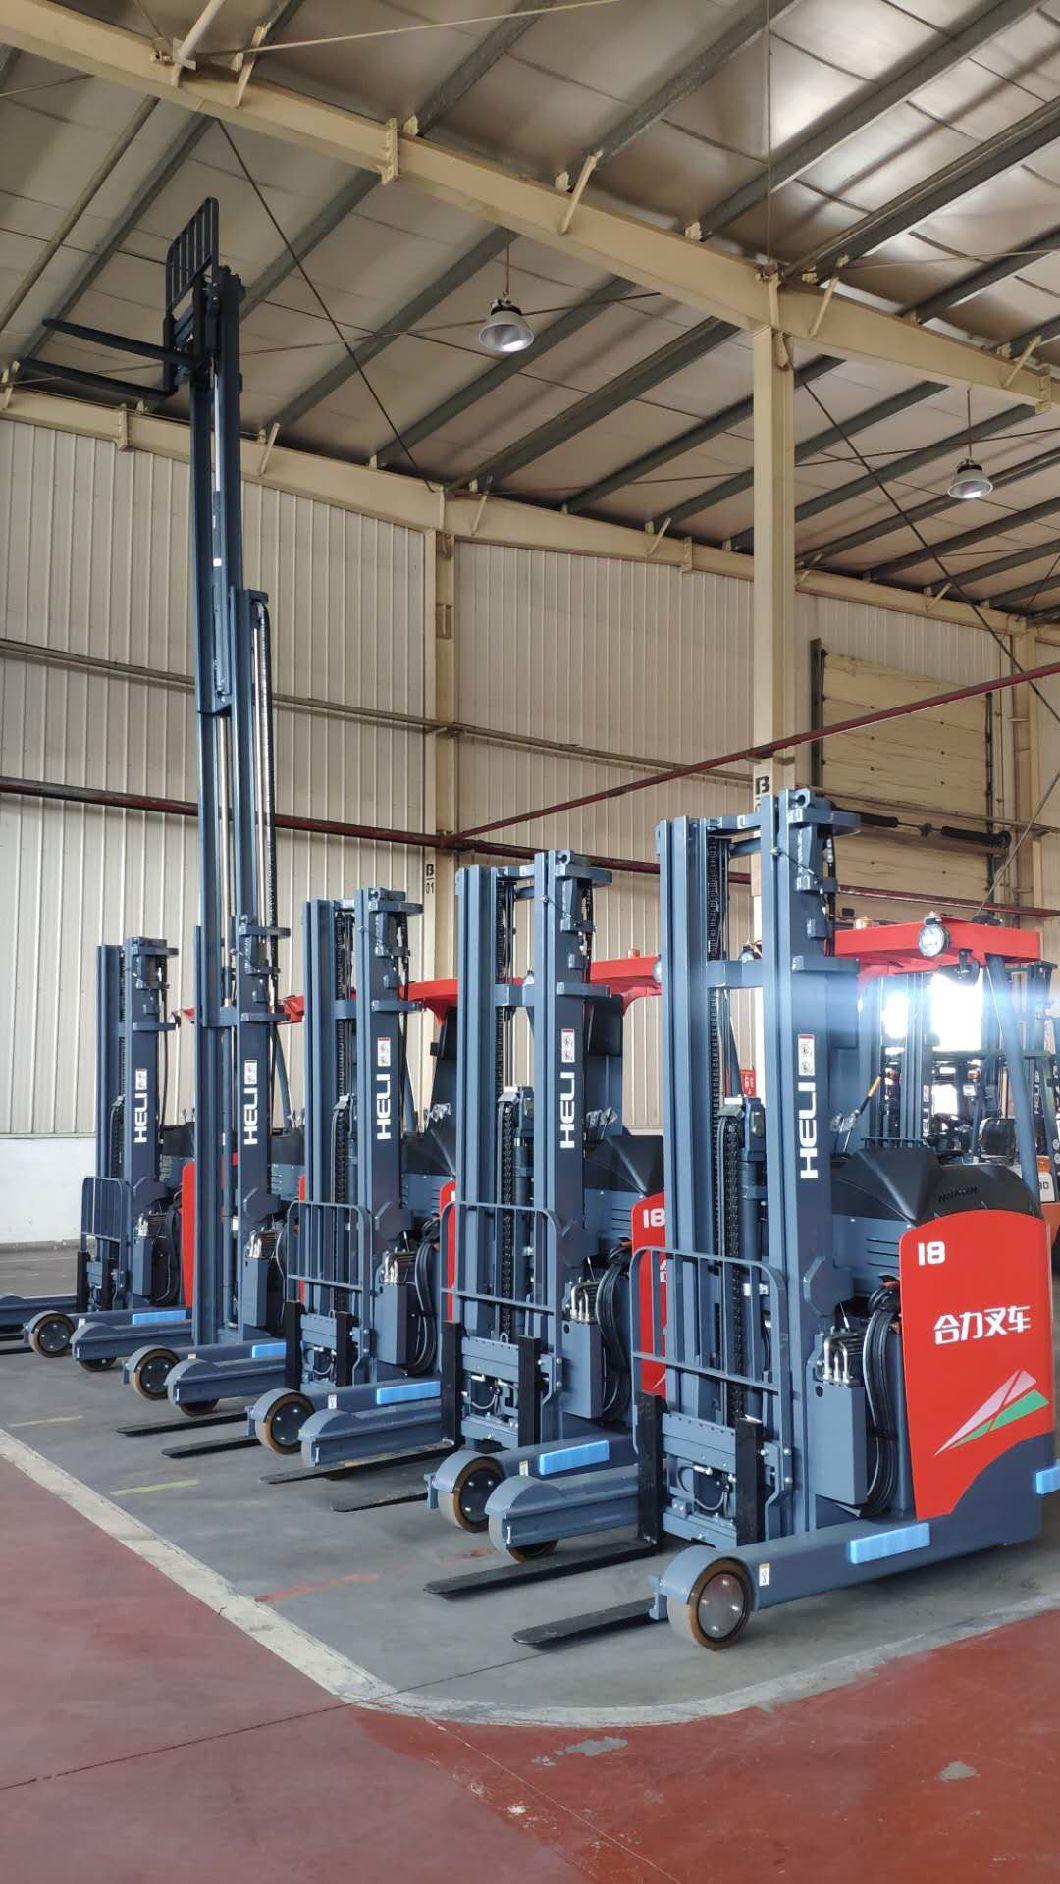 China Top Brand Heli 1.6t 1.8t 2t 3t 5t Warehouse Reach Truck Electric Forklift Cqd16